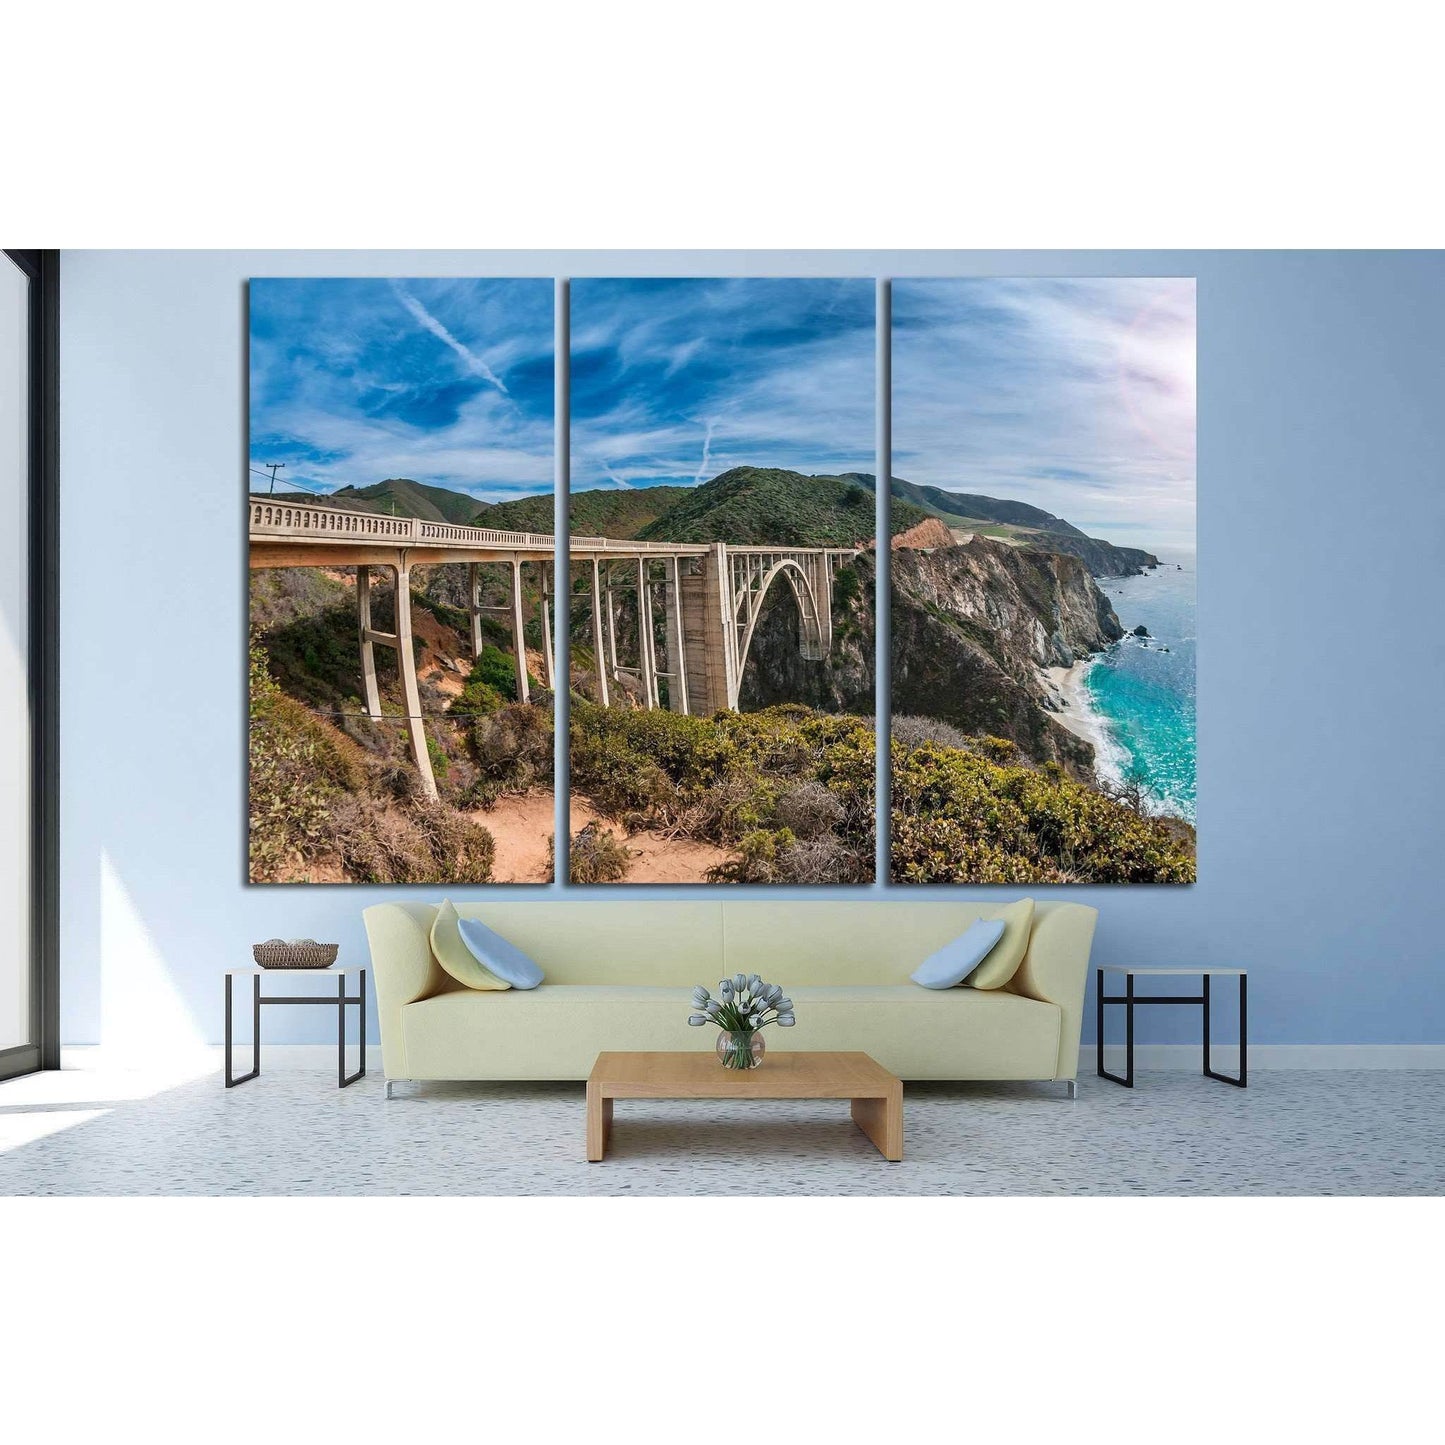 Big Sur's Bixby Bridge Wall Decor - Majestic Pacific Ocean View ArtworkThis canvas print features the iconic Bixby Creek Bridge on California's Big Sur coast, renowned for its stunning architectural beauty and the breathtaking scenery surrounding it. The